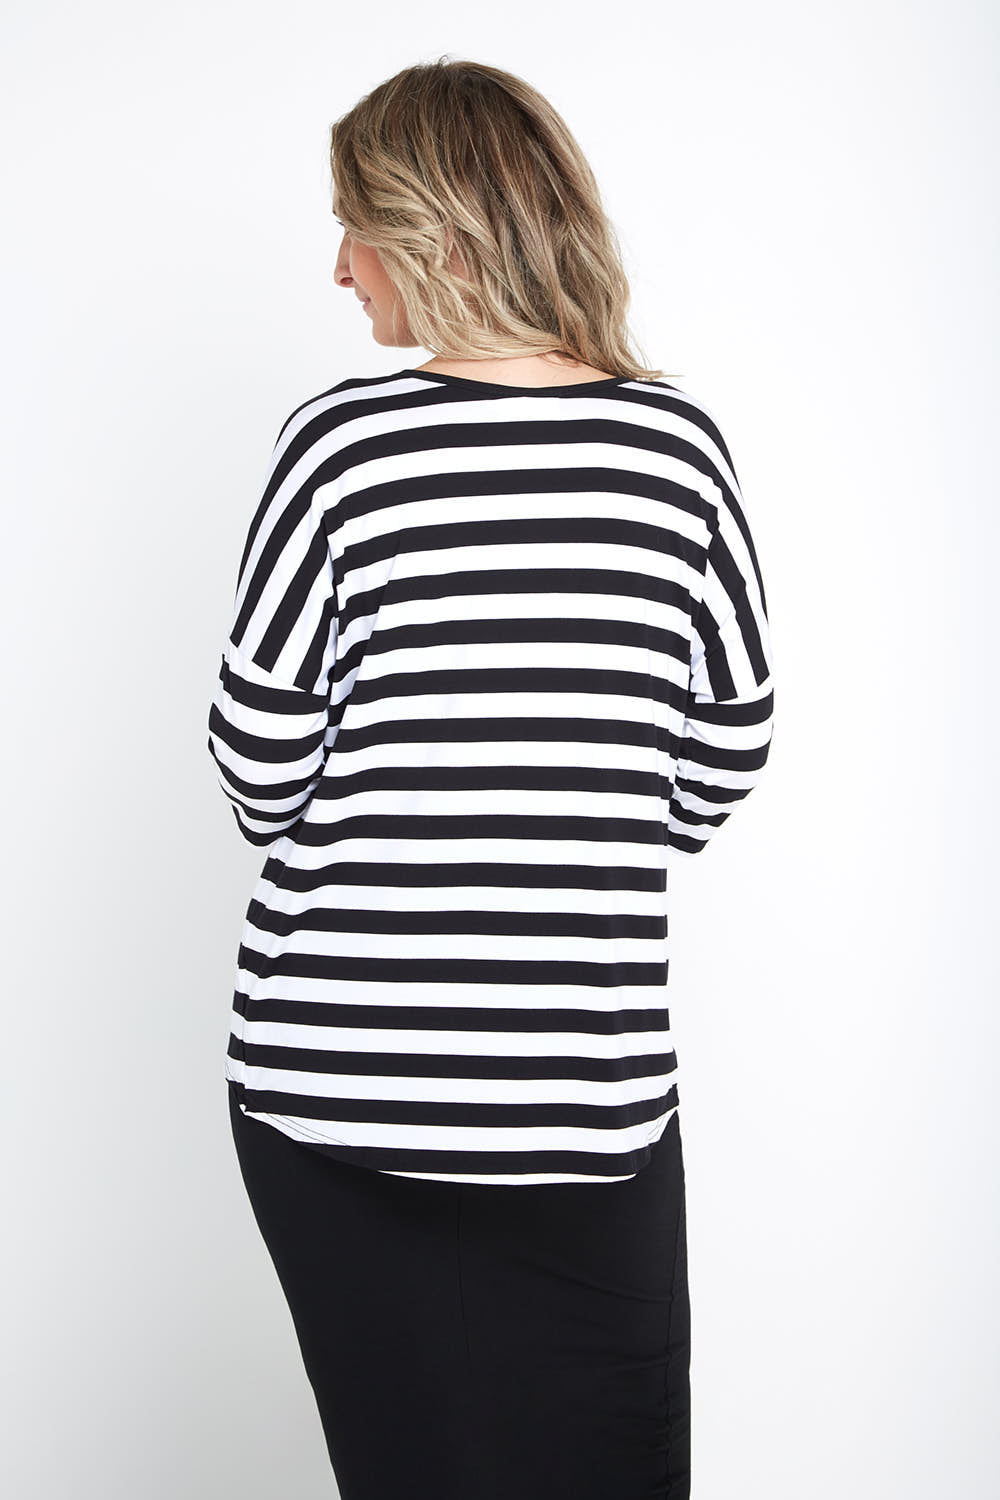 Montmartre Bamboo Top - Wide Black/White